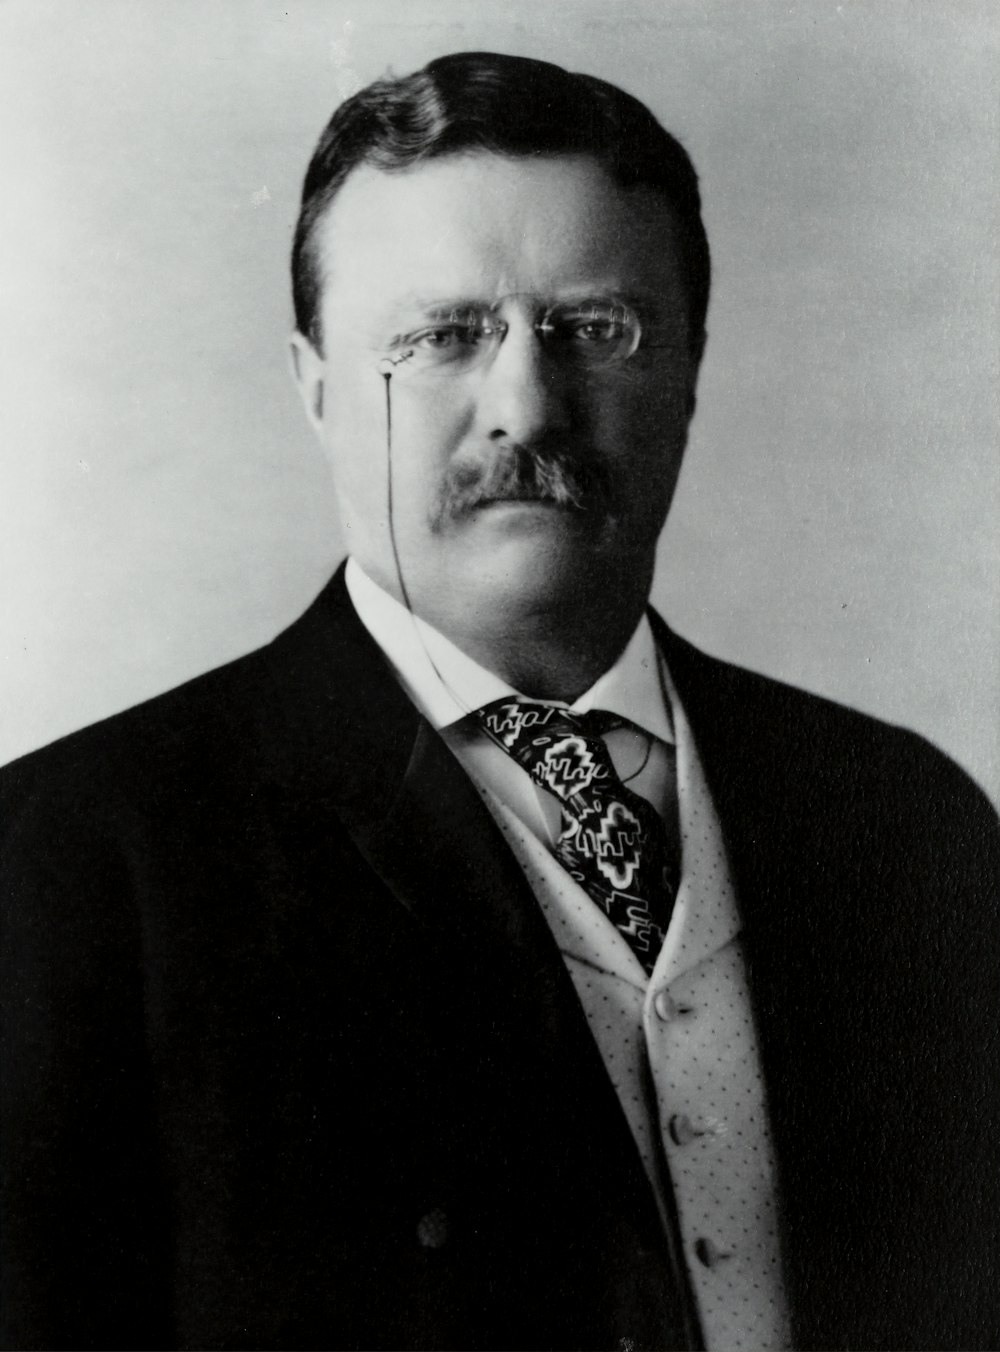 [Theodore Roosevelt, three quarter length portrait, facing front]. Photograph by the Pach Brothers, c1904. Library of Congress Prints & Photographs Division. https://www.loc.gov/resource/cph.3a53299/